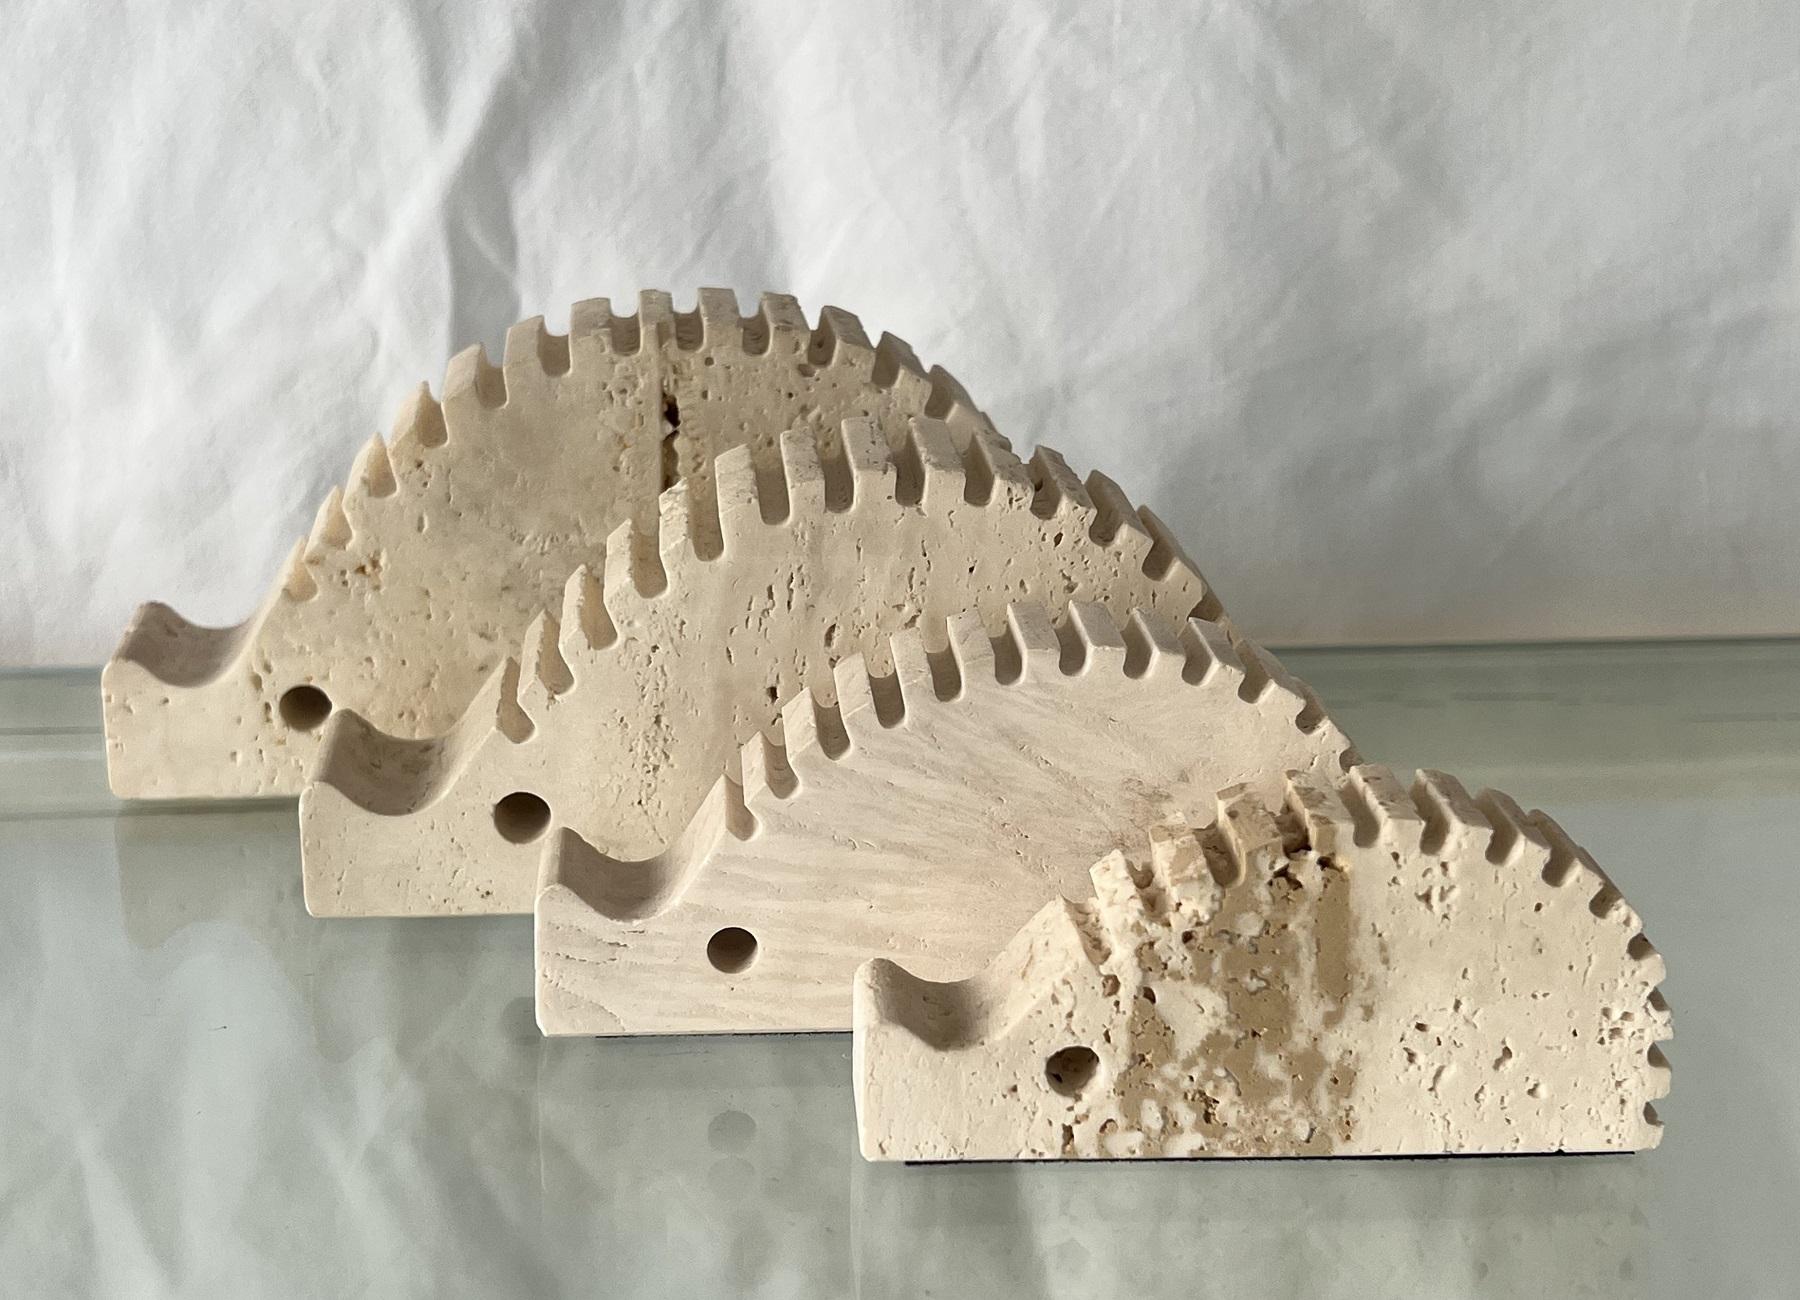 Beautiful set consisting of 4 hedgehogs in different sizes made of travertine stone.
The hedgehogs are handcrafted and are in excellent, clean condition. 
Since travertine stone is a natural material, the stone spores and colors are completely